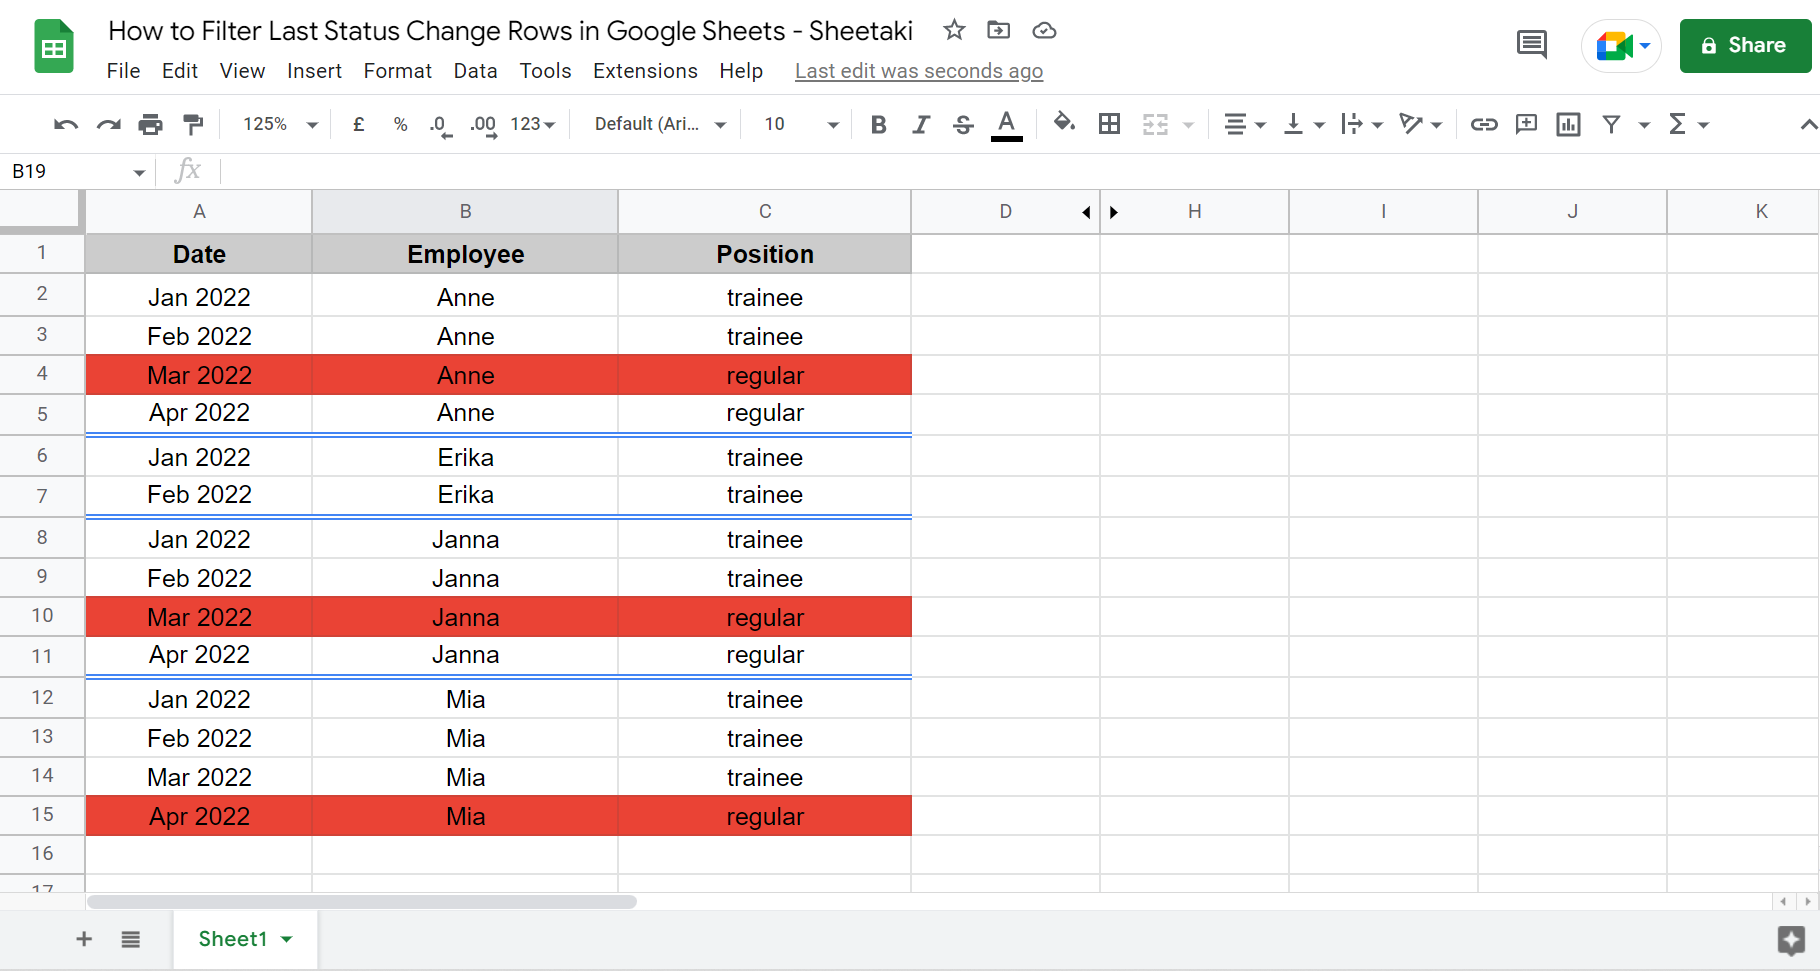 A sample of highlighted status change rows